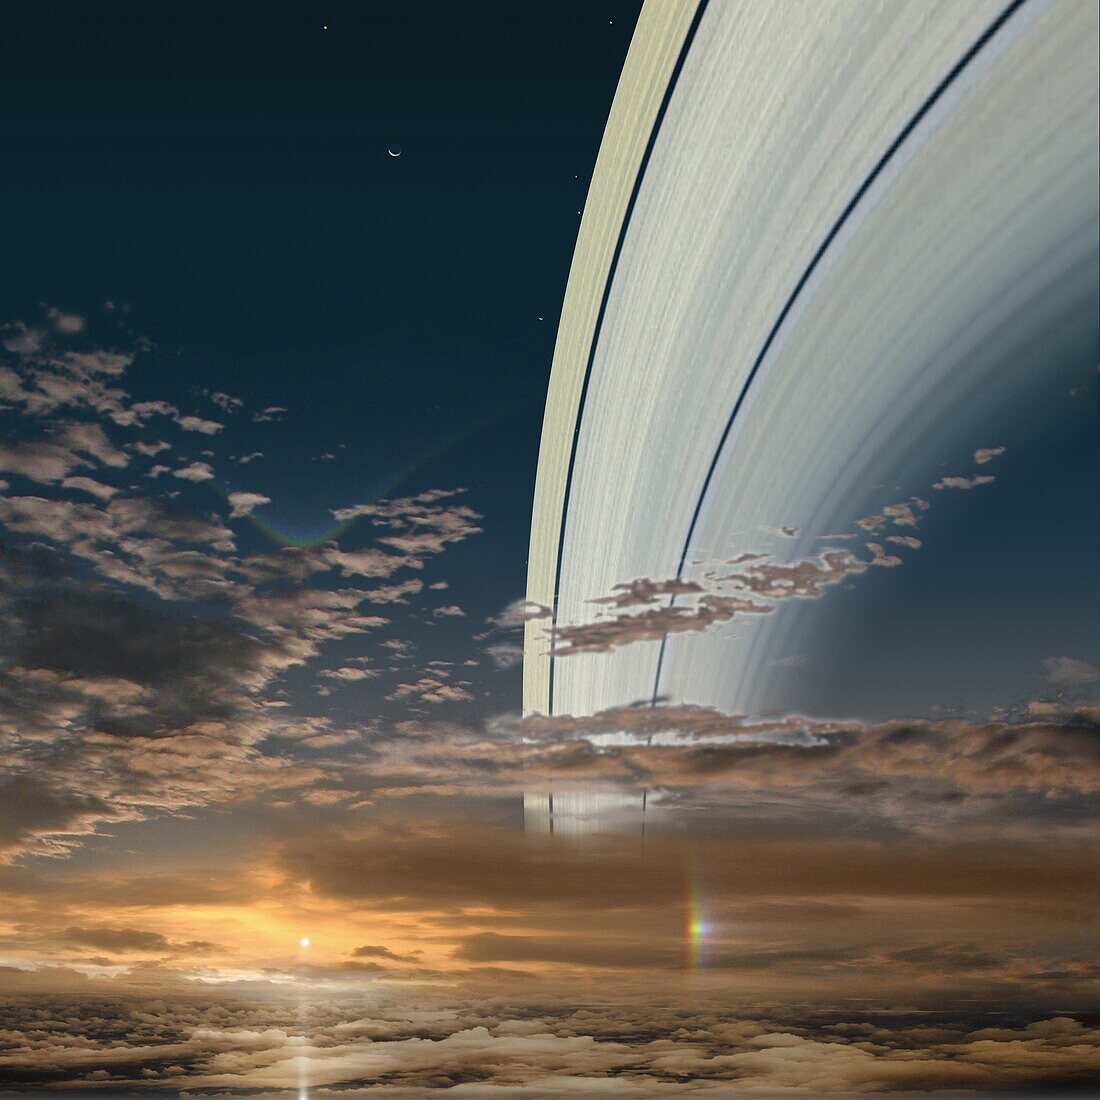 Saturn’s rings seen from Saturn, illustration